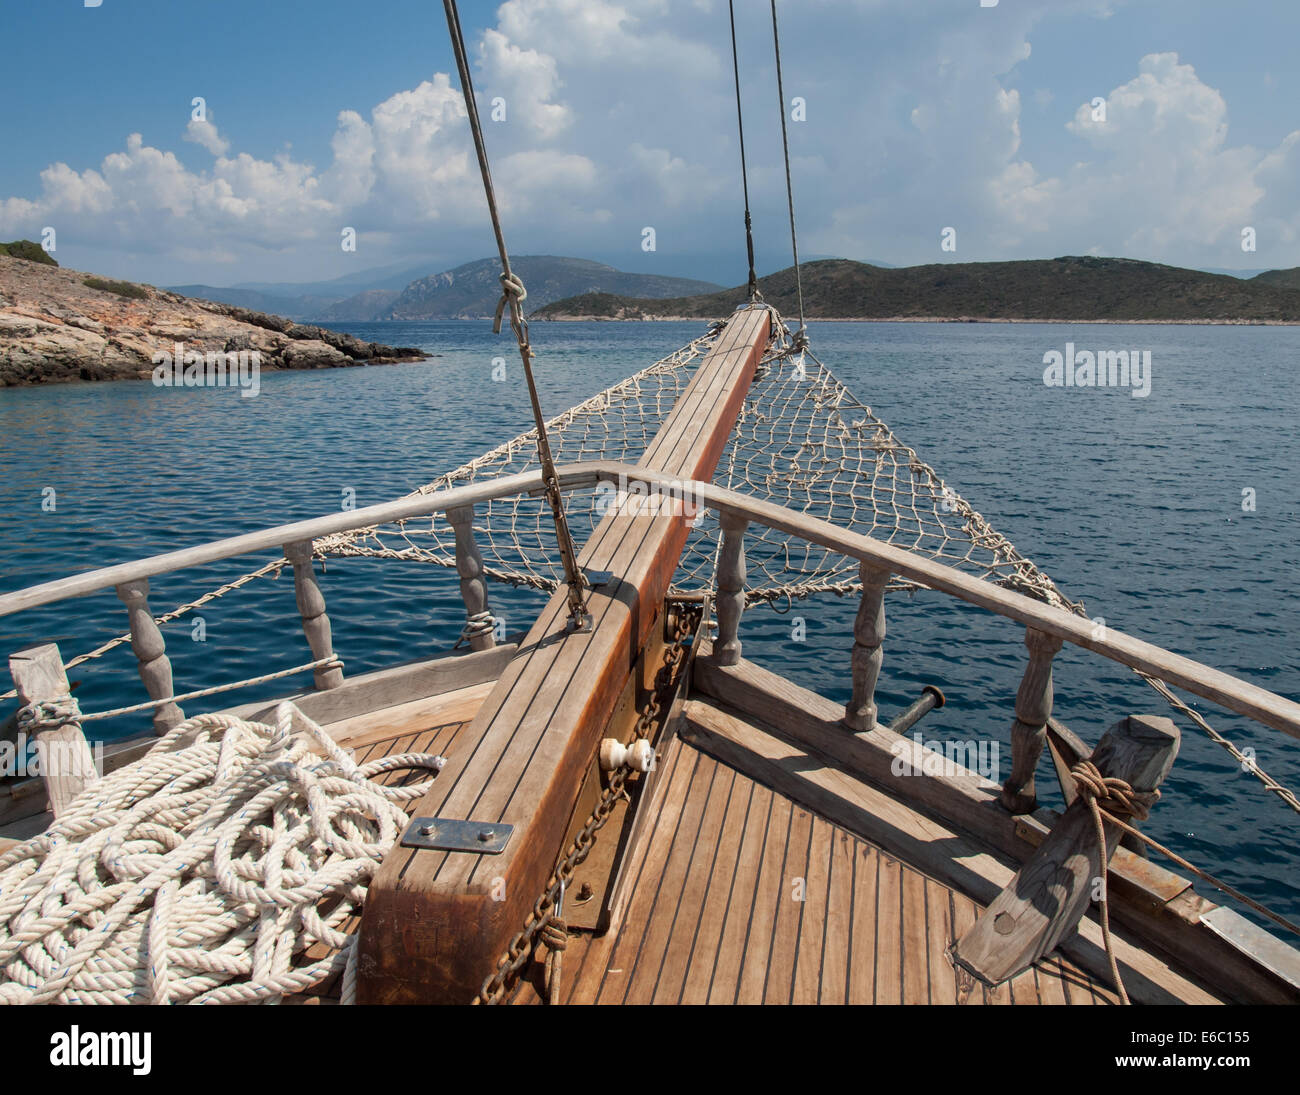 the bow of a traditional wooden boat with teak deck, hardwood bowsprit withislands and hills Stock Photo